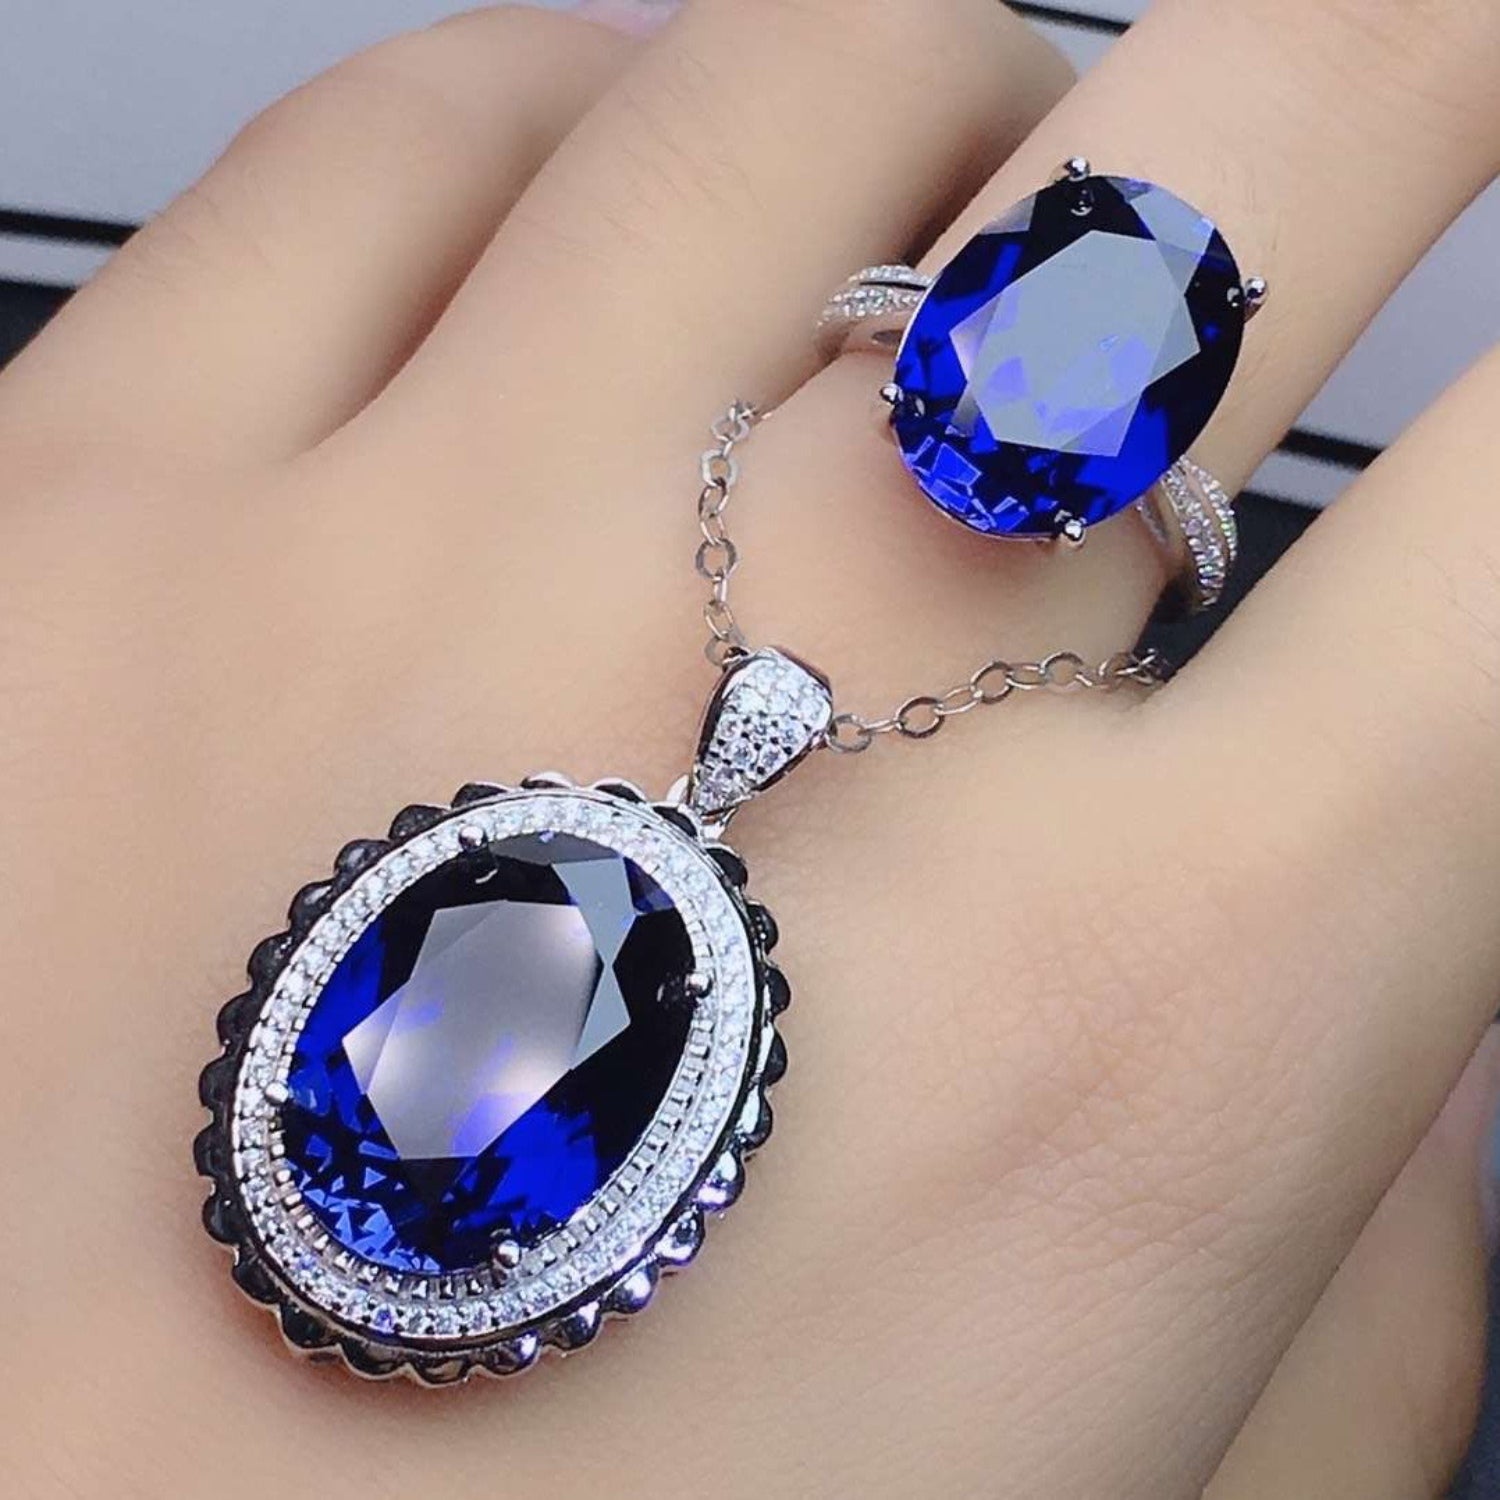 Platinum-Plated Artificial Gemstone Ring - Tophatter Deals